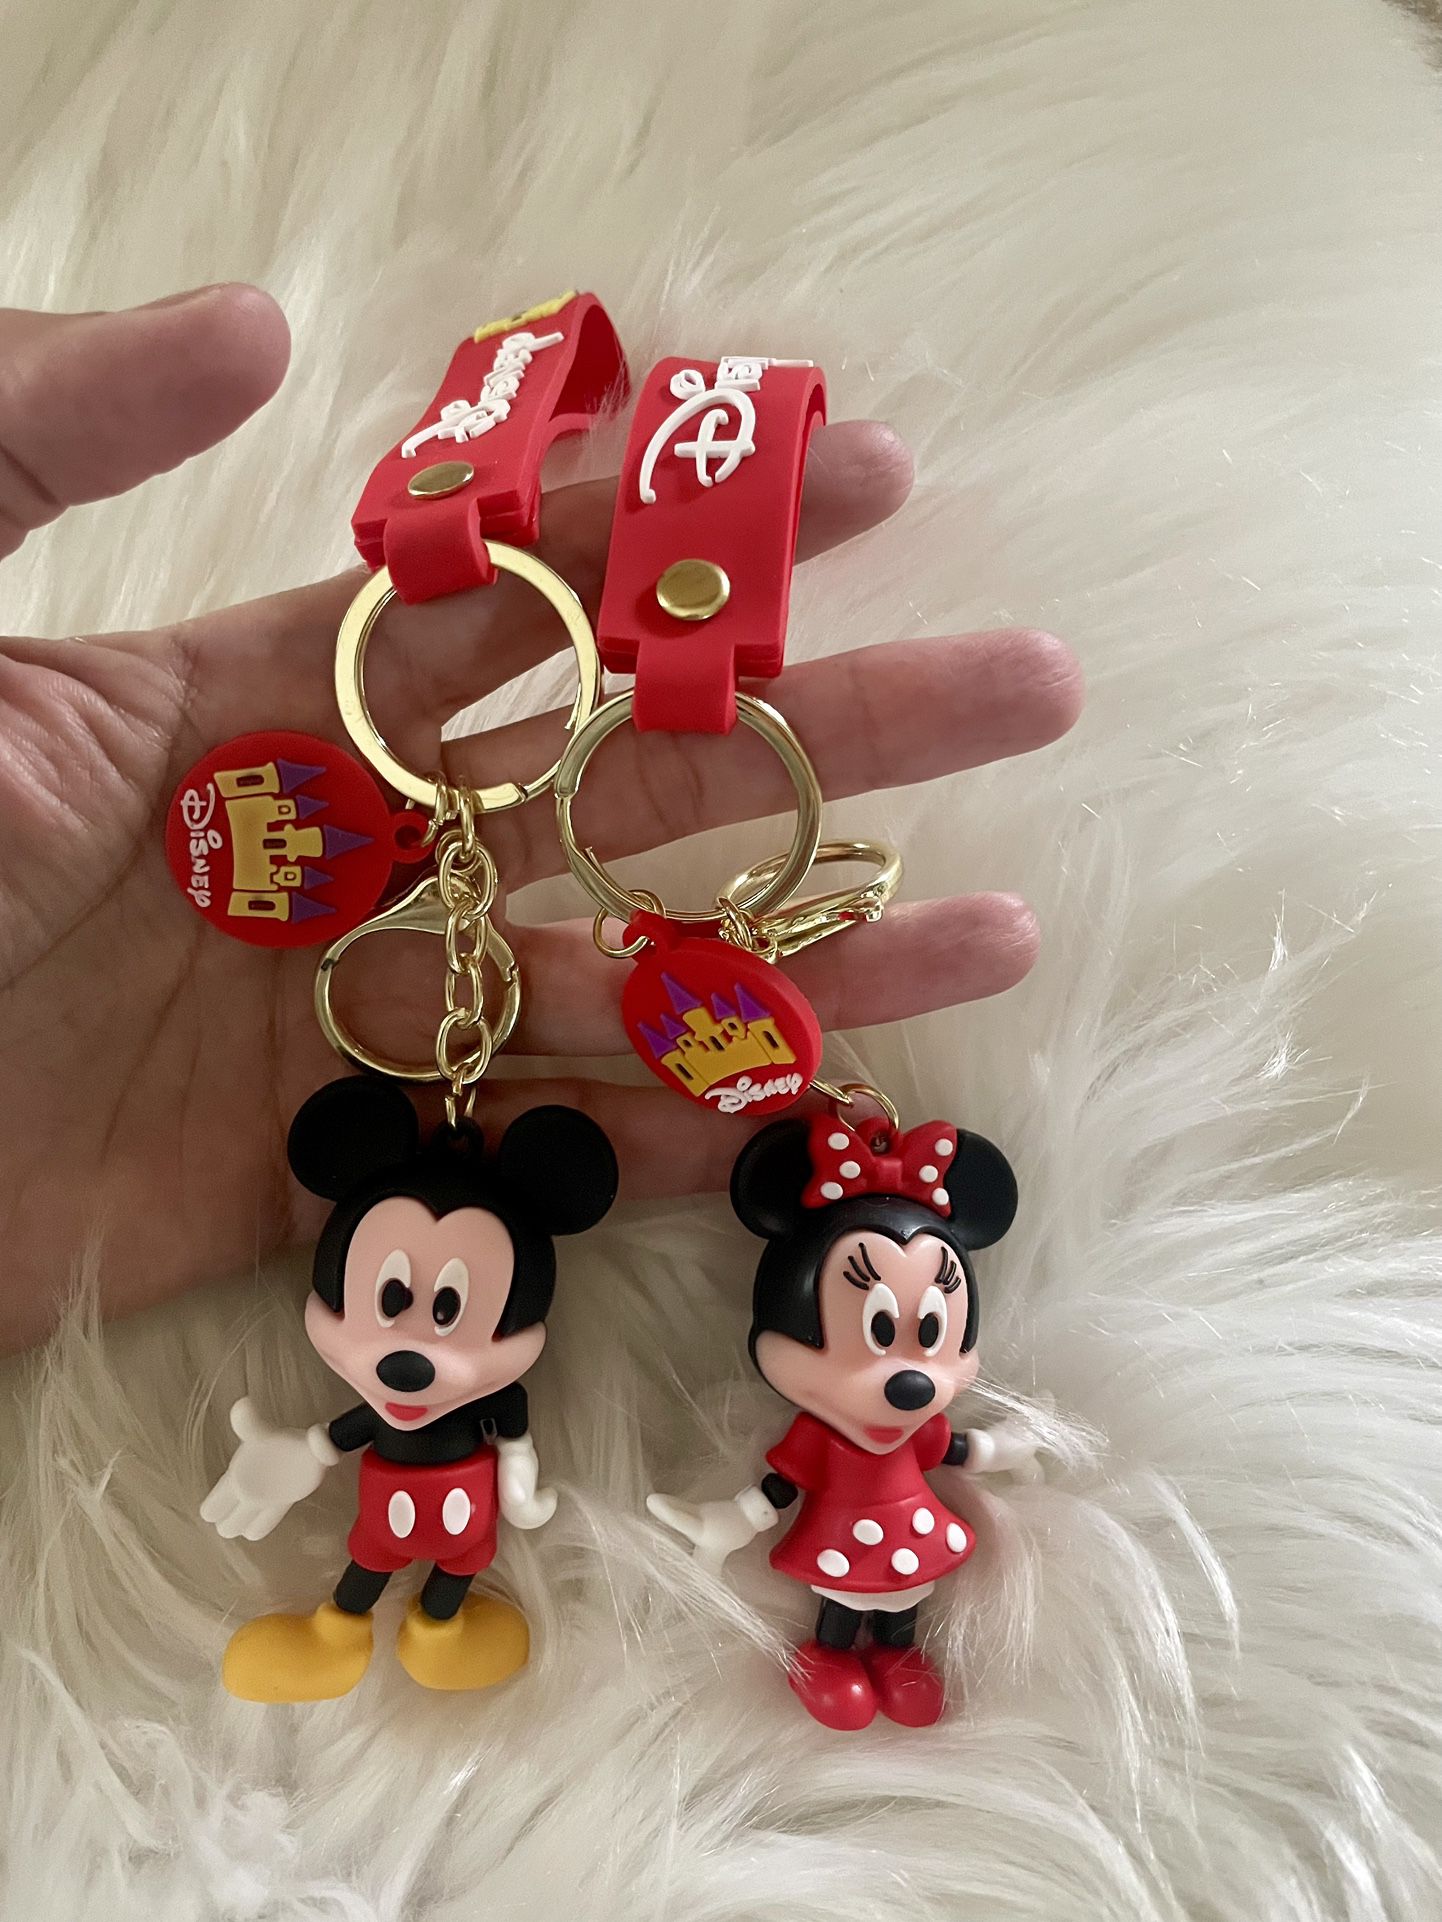 Brand New Pair Of Disney Mickey And Minnie Mouse Vacation Suprise Keychain Set 